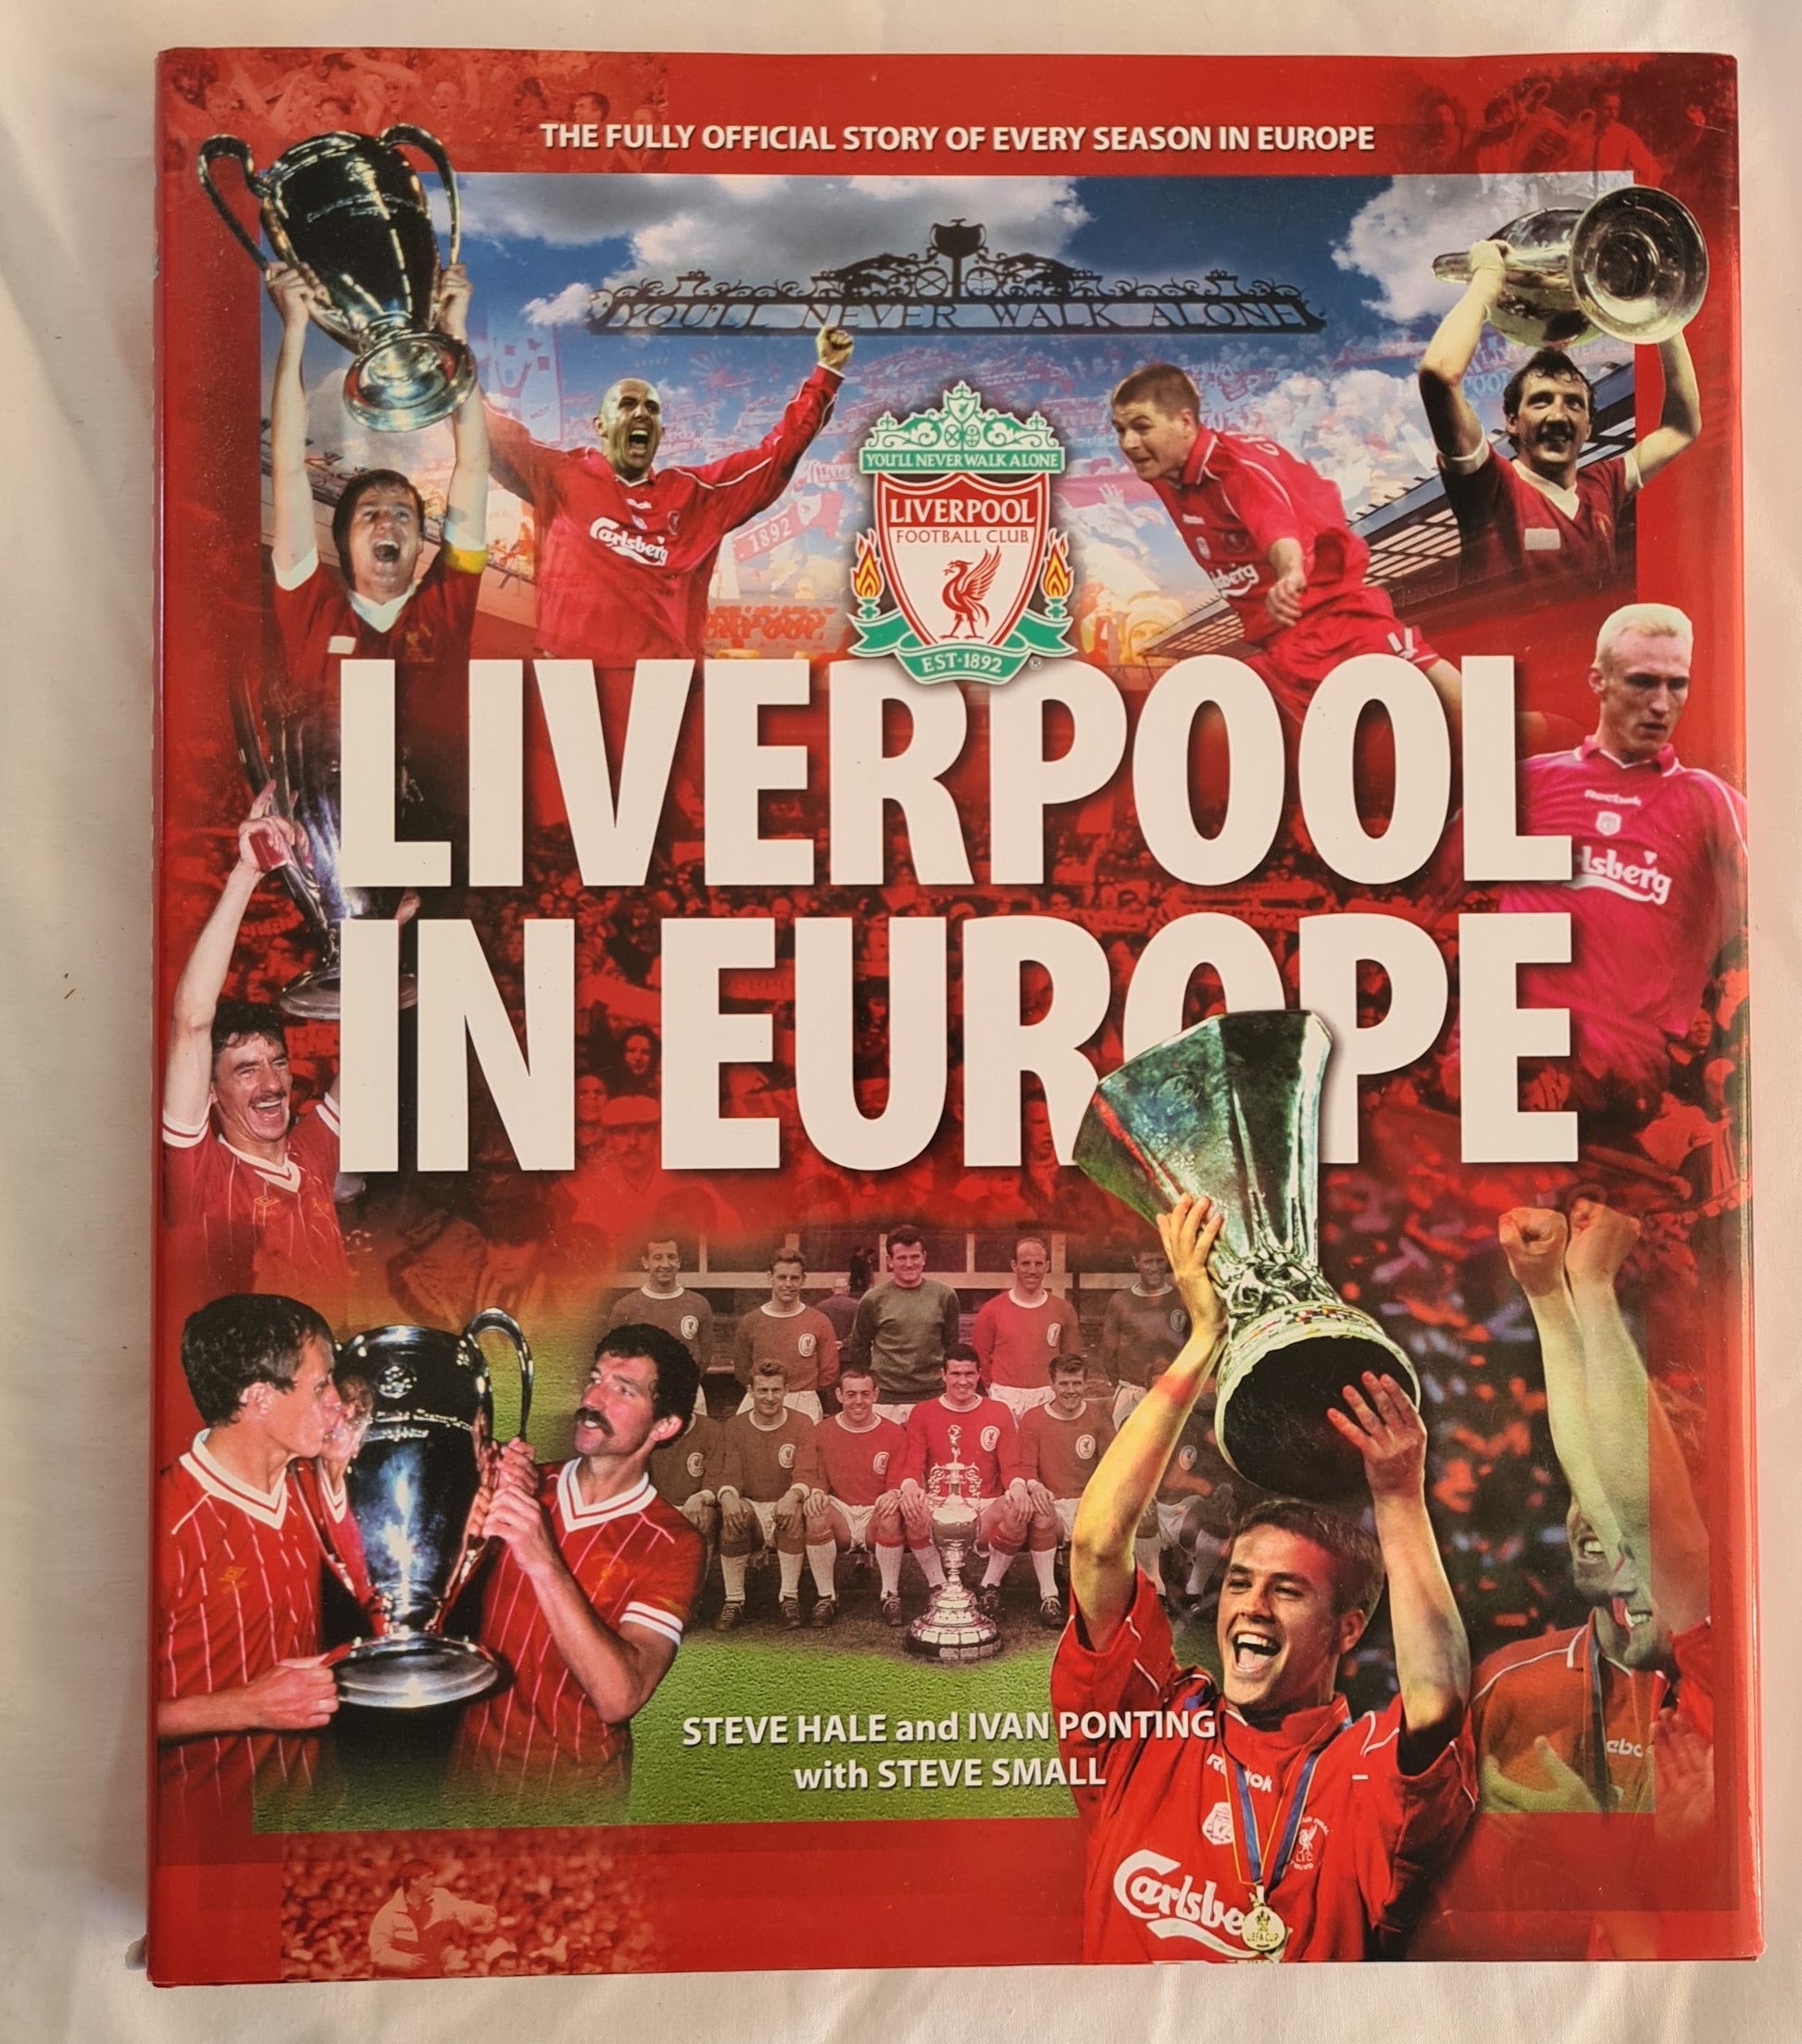 Liverpool in Europe  by Steve Hale and Ivan Ponting with Steve Small